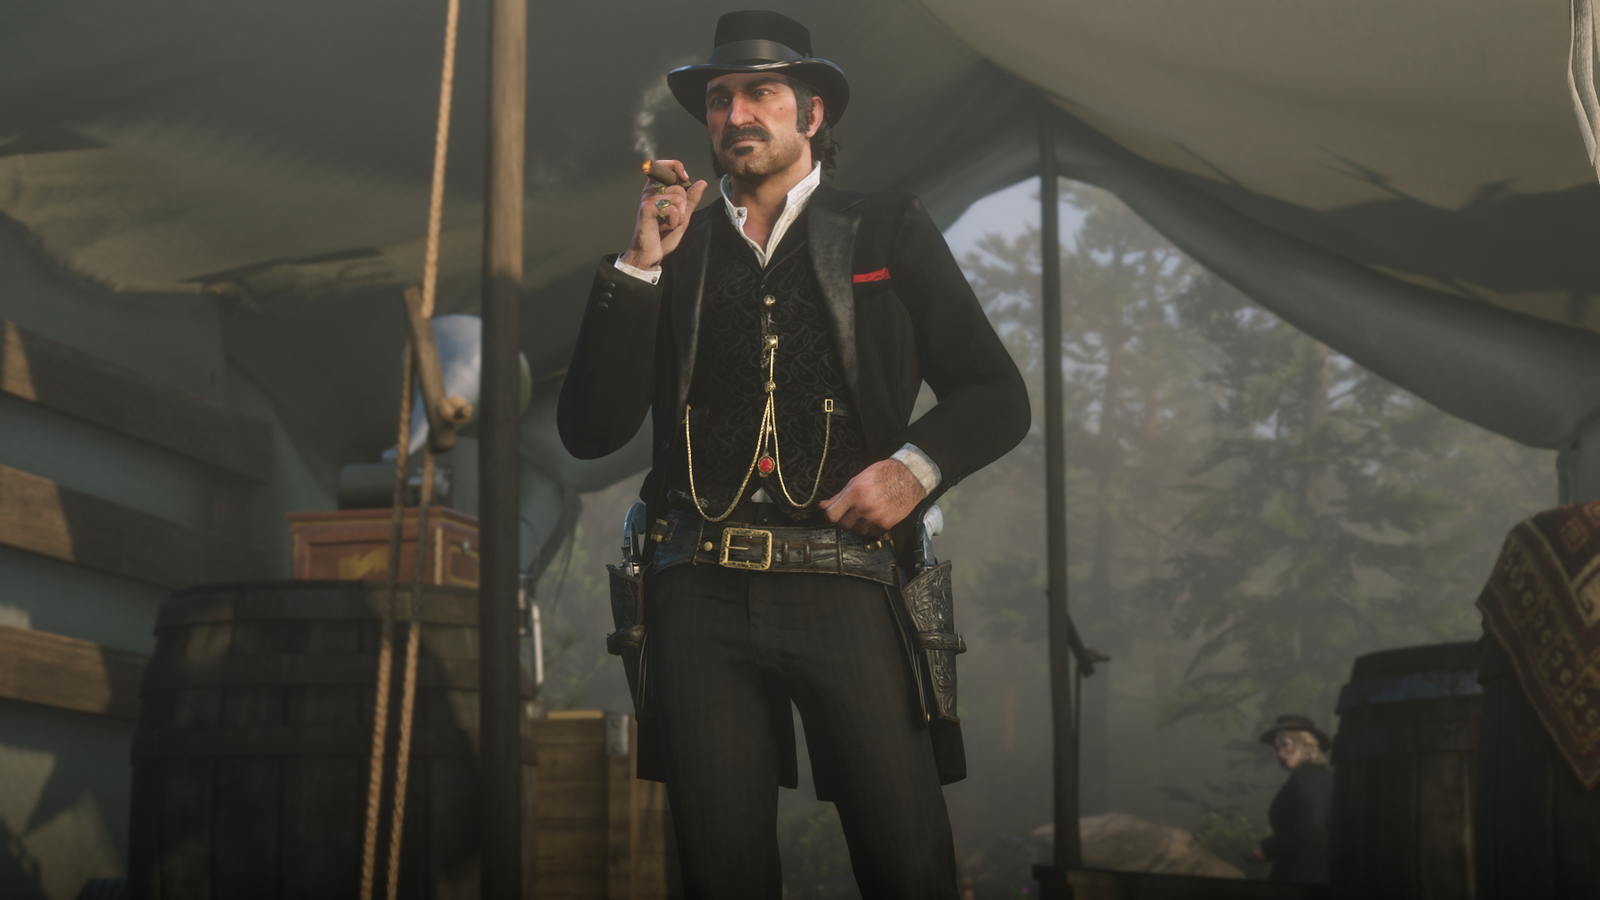 Red Dead Redemption 2 is finally coming to PC in November